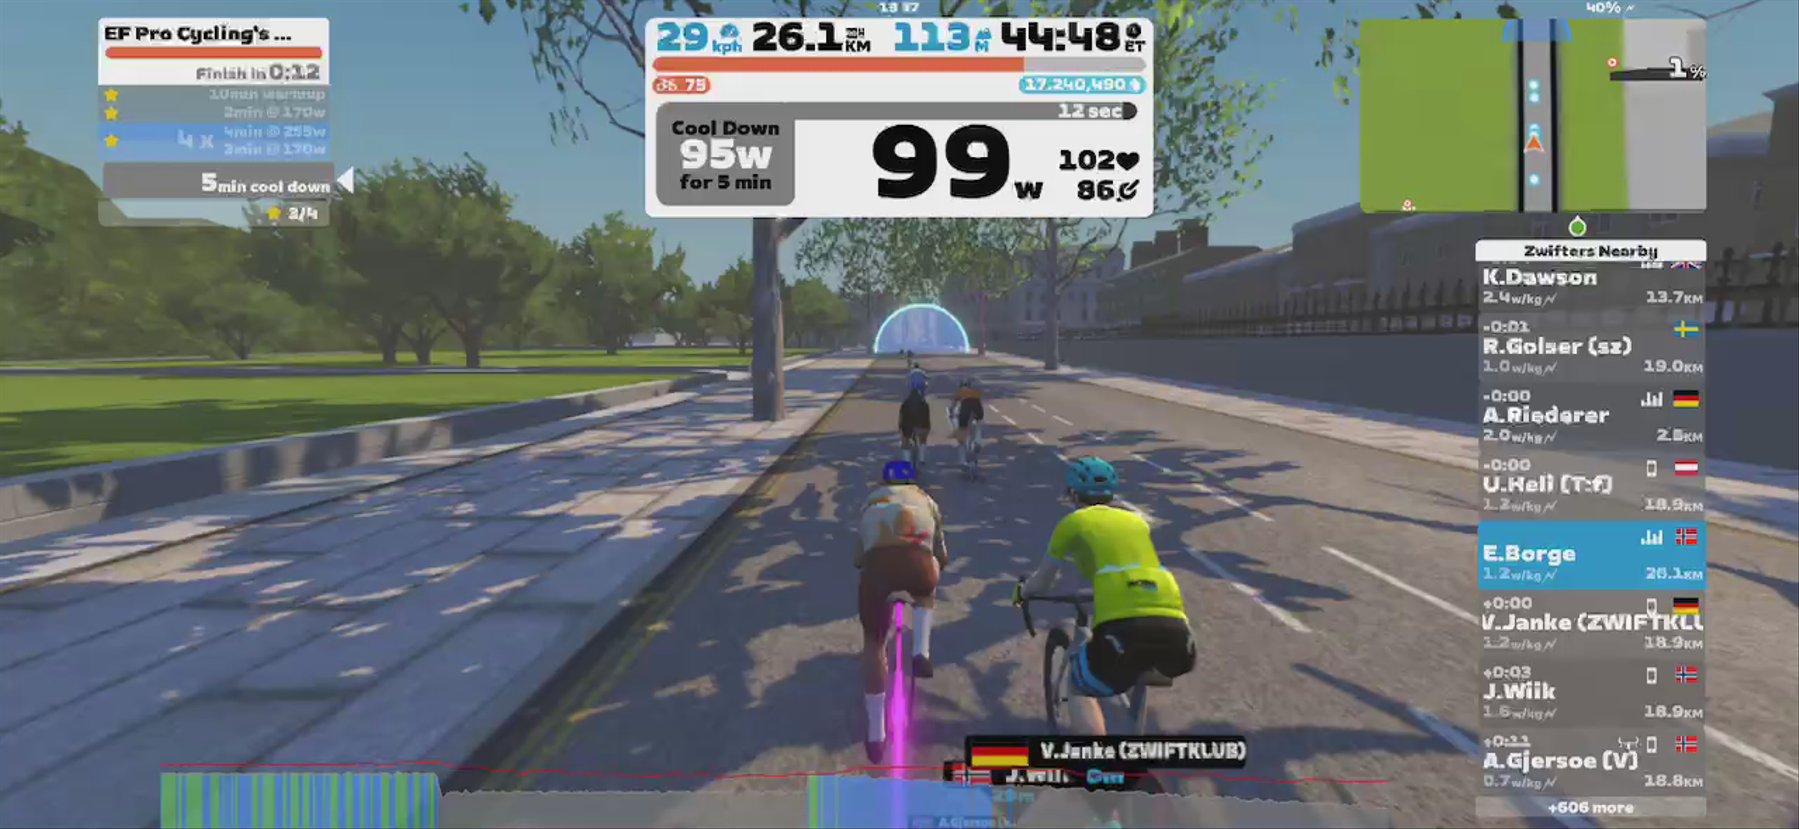 Zwift - EF Pro Cycling's Red Day Workout in London